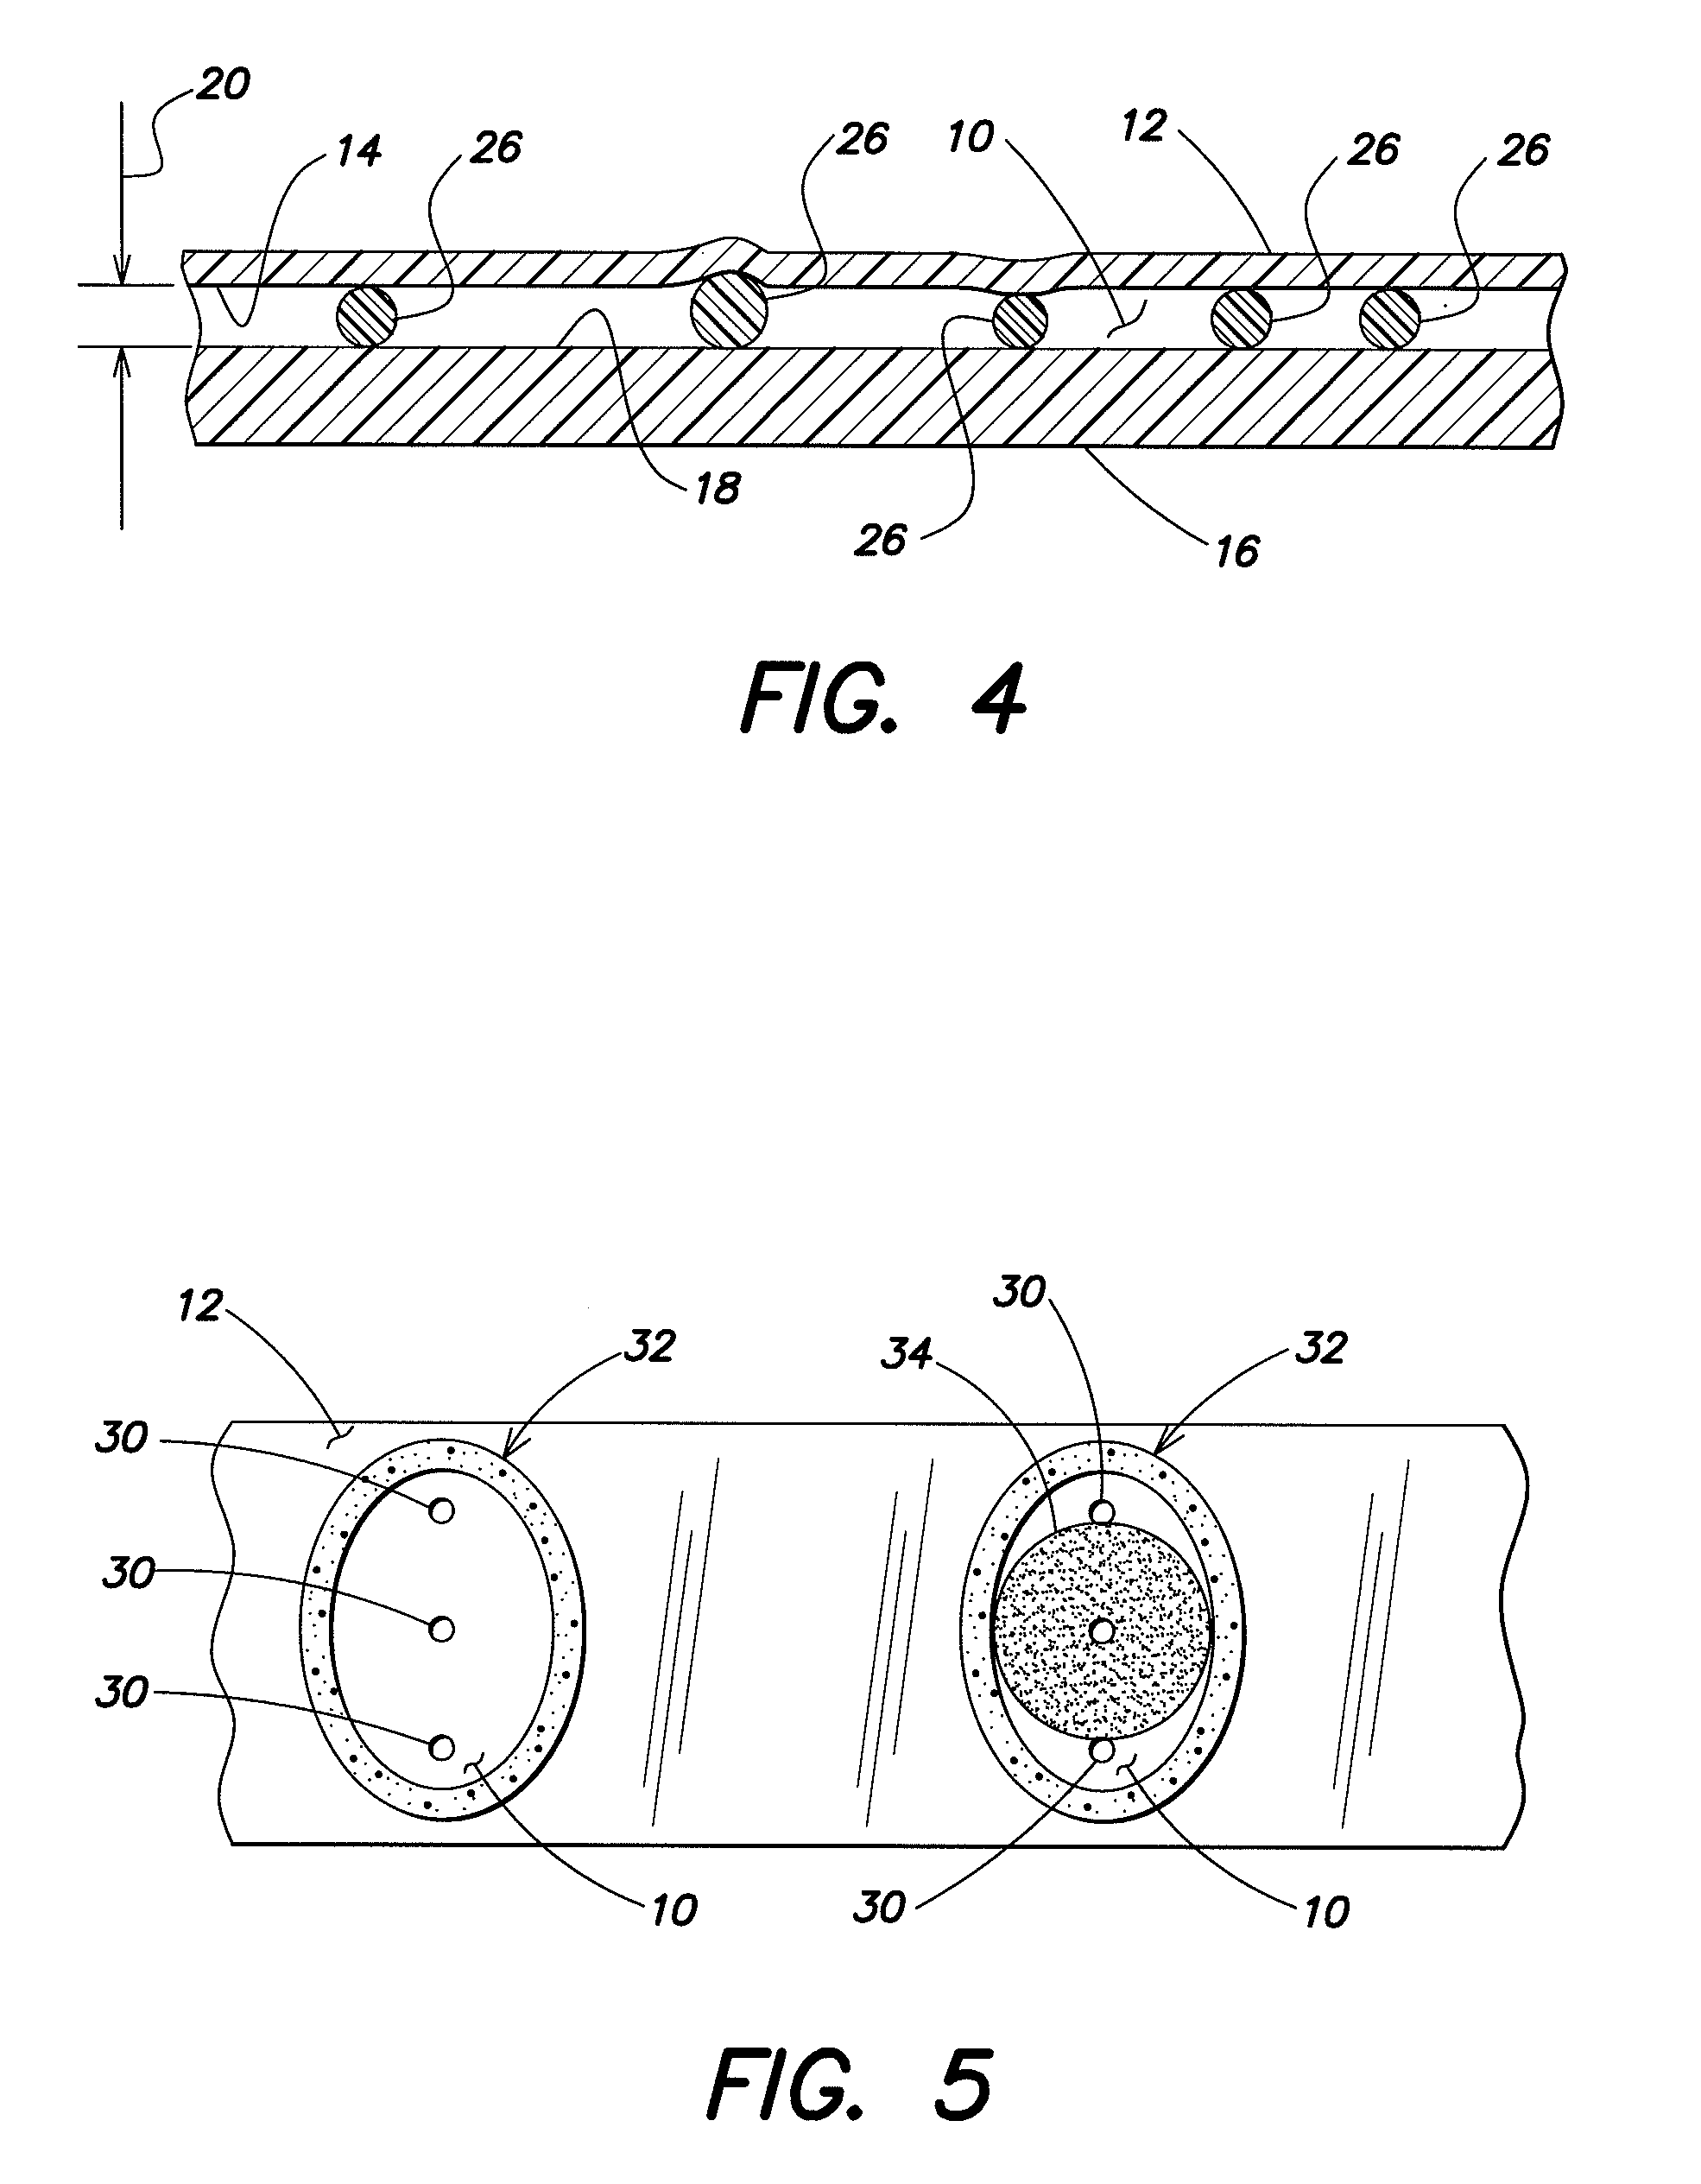 Method and apparatus for determining red blood cell indices of a blood sample utilizing the intrinsic pigmentation of hemoglobin contained within the red blood cells